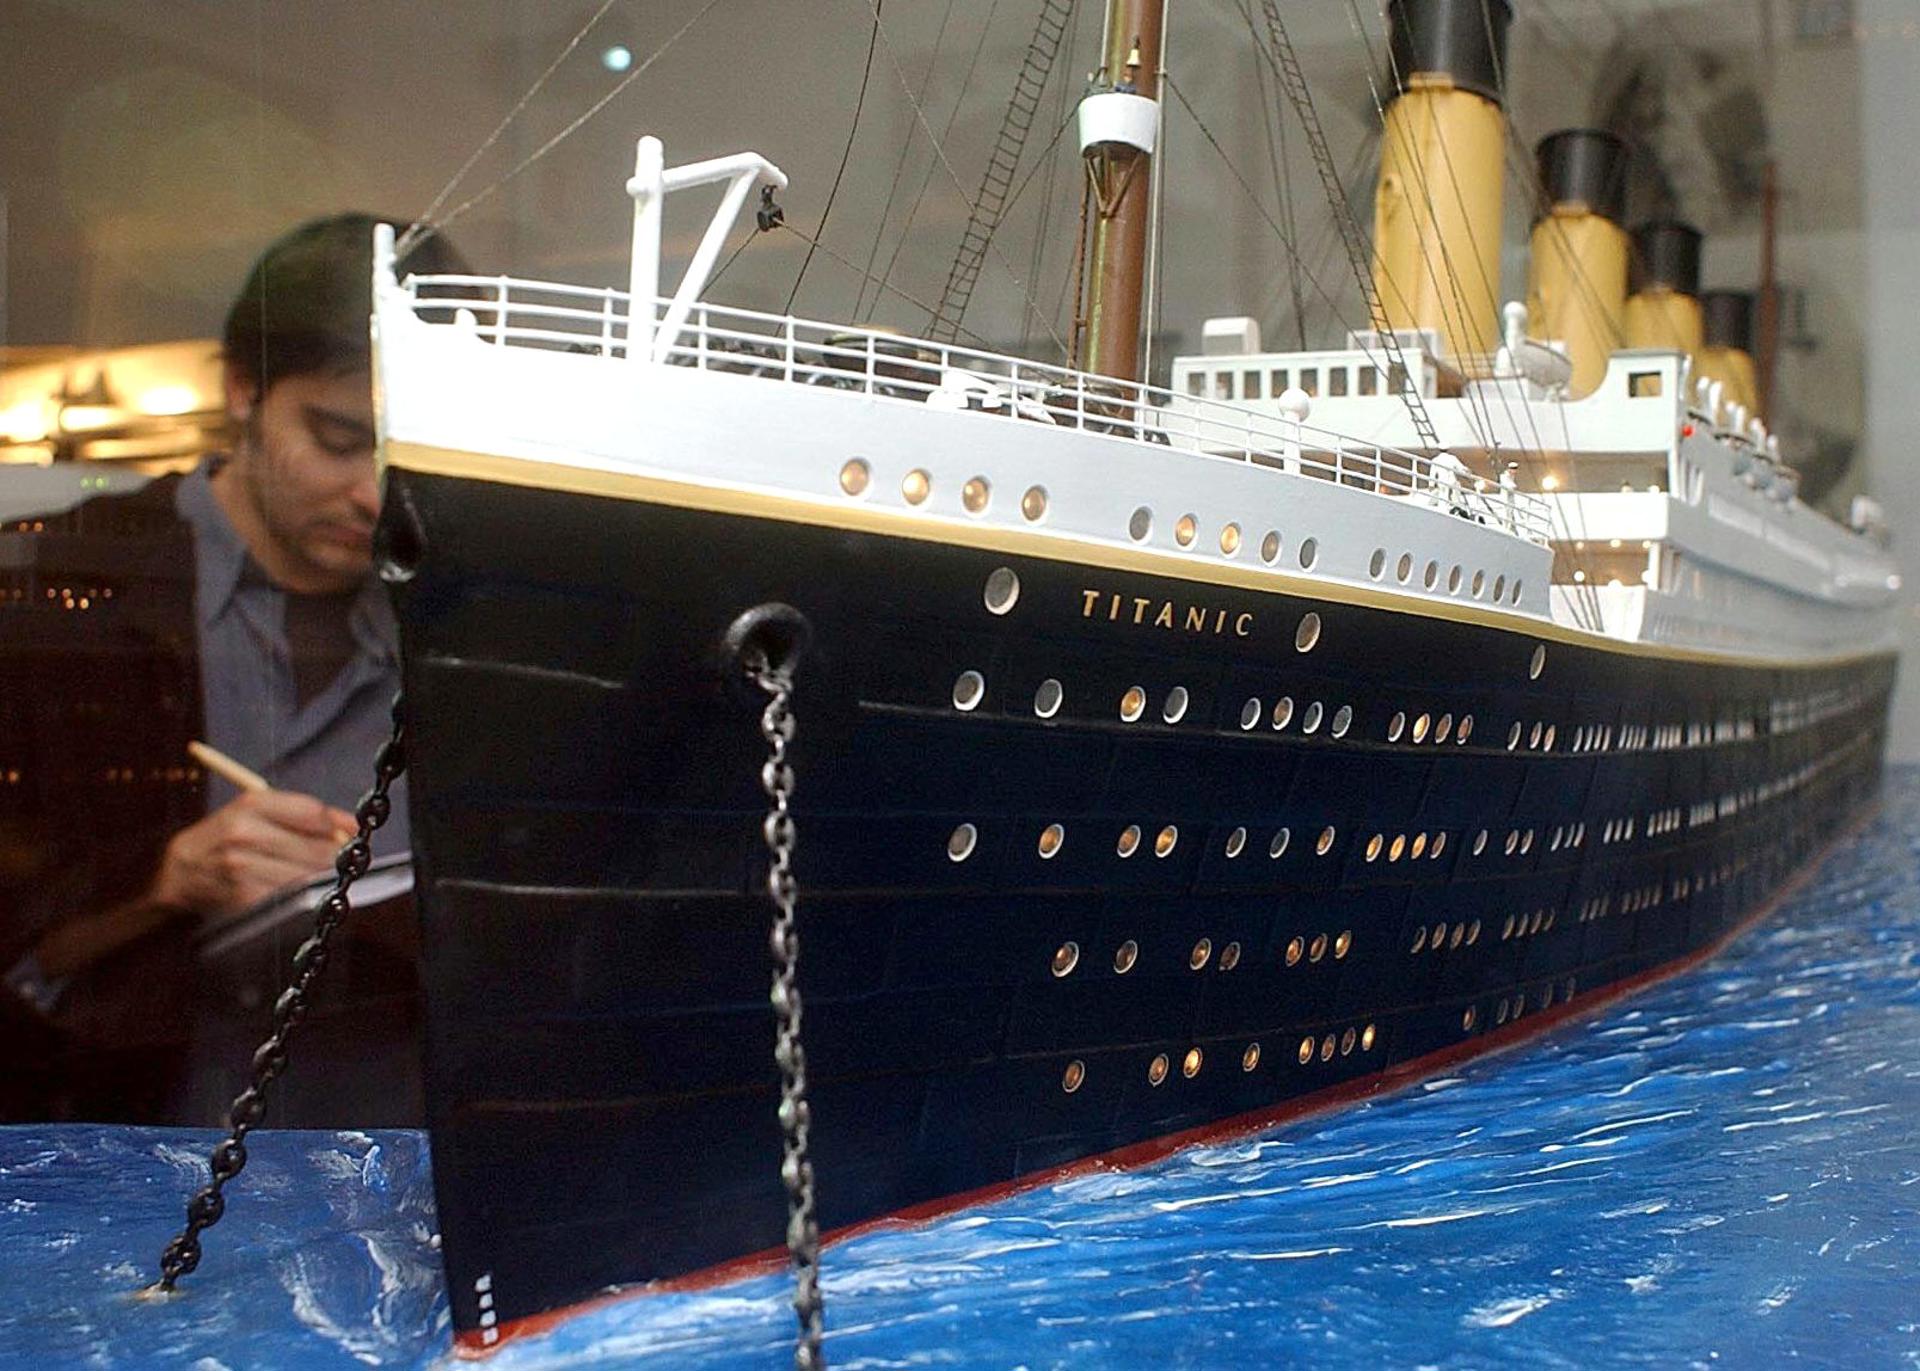 A model of the Titanic ship that is part of the exhibition "Titanic: The Exhibition" in León, Spain, on 30 March, 2003. EFE FILE/ J. CASARES